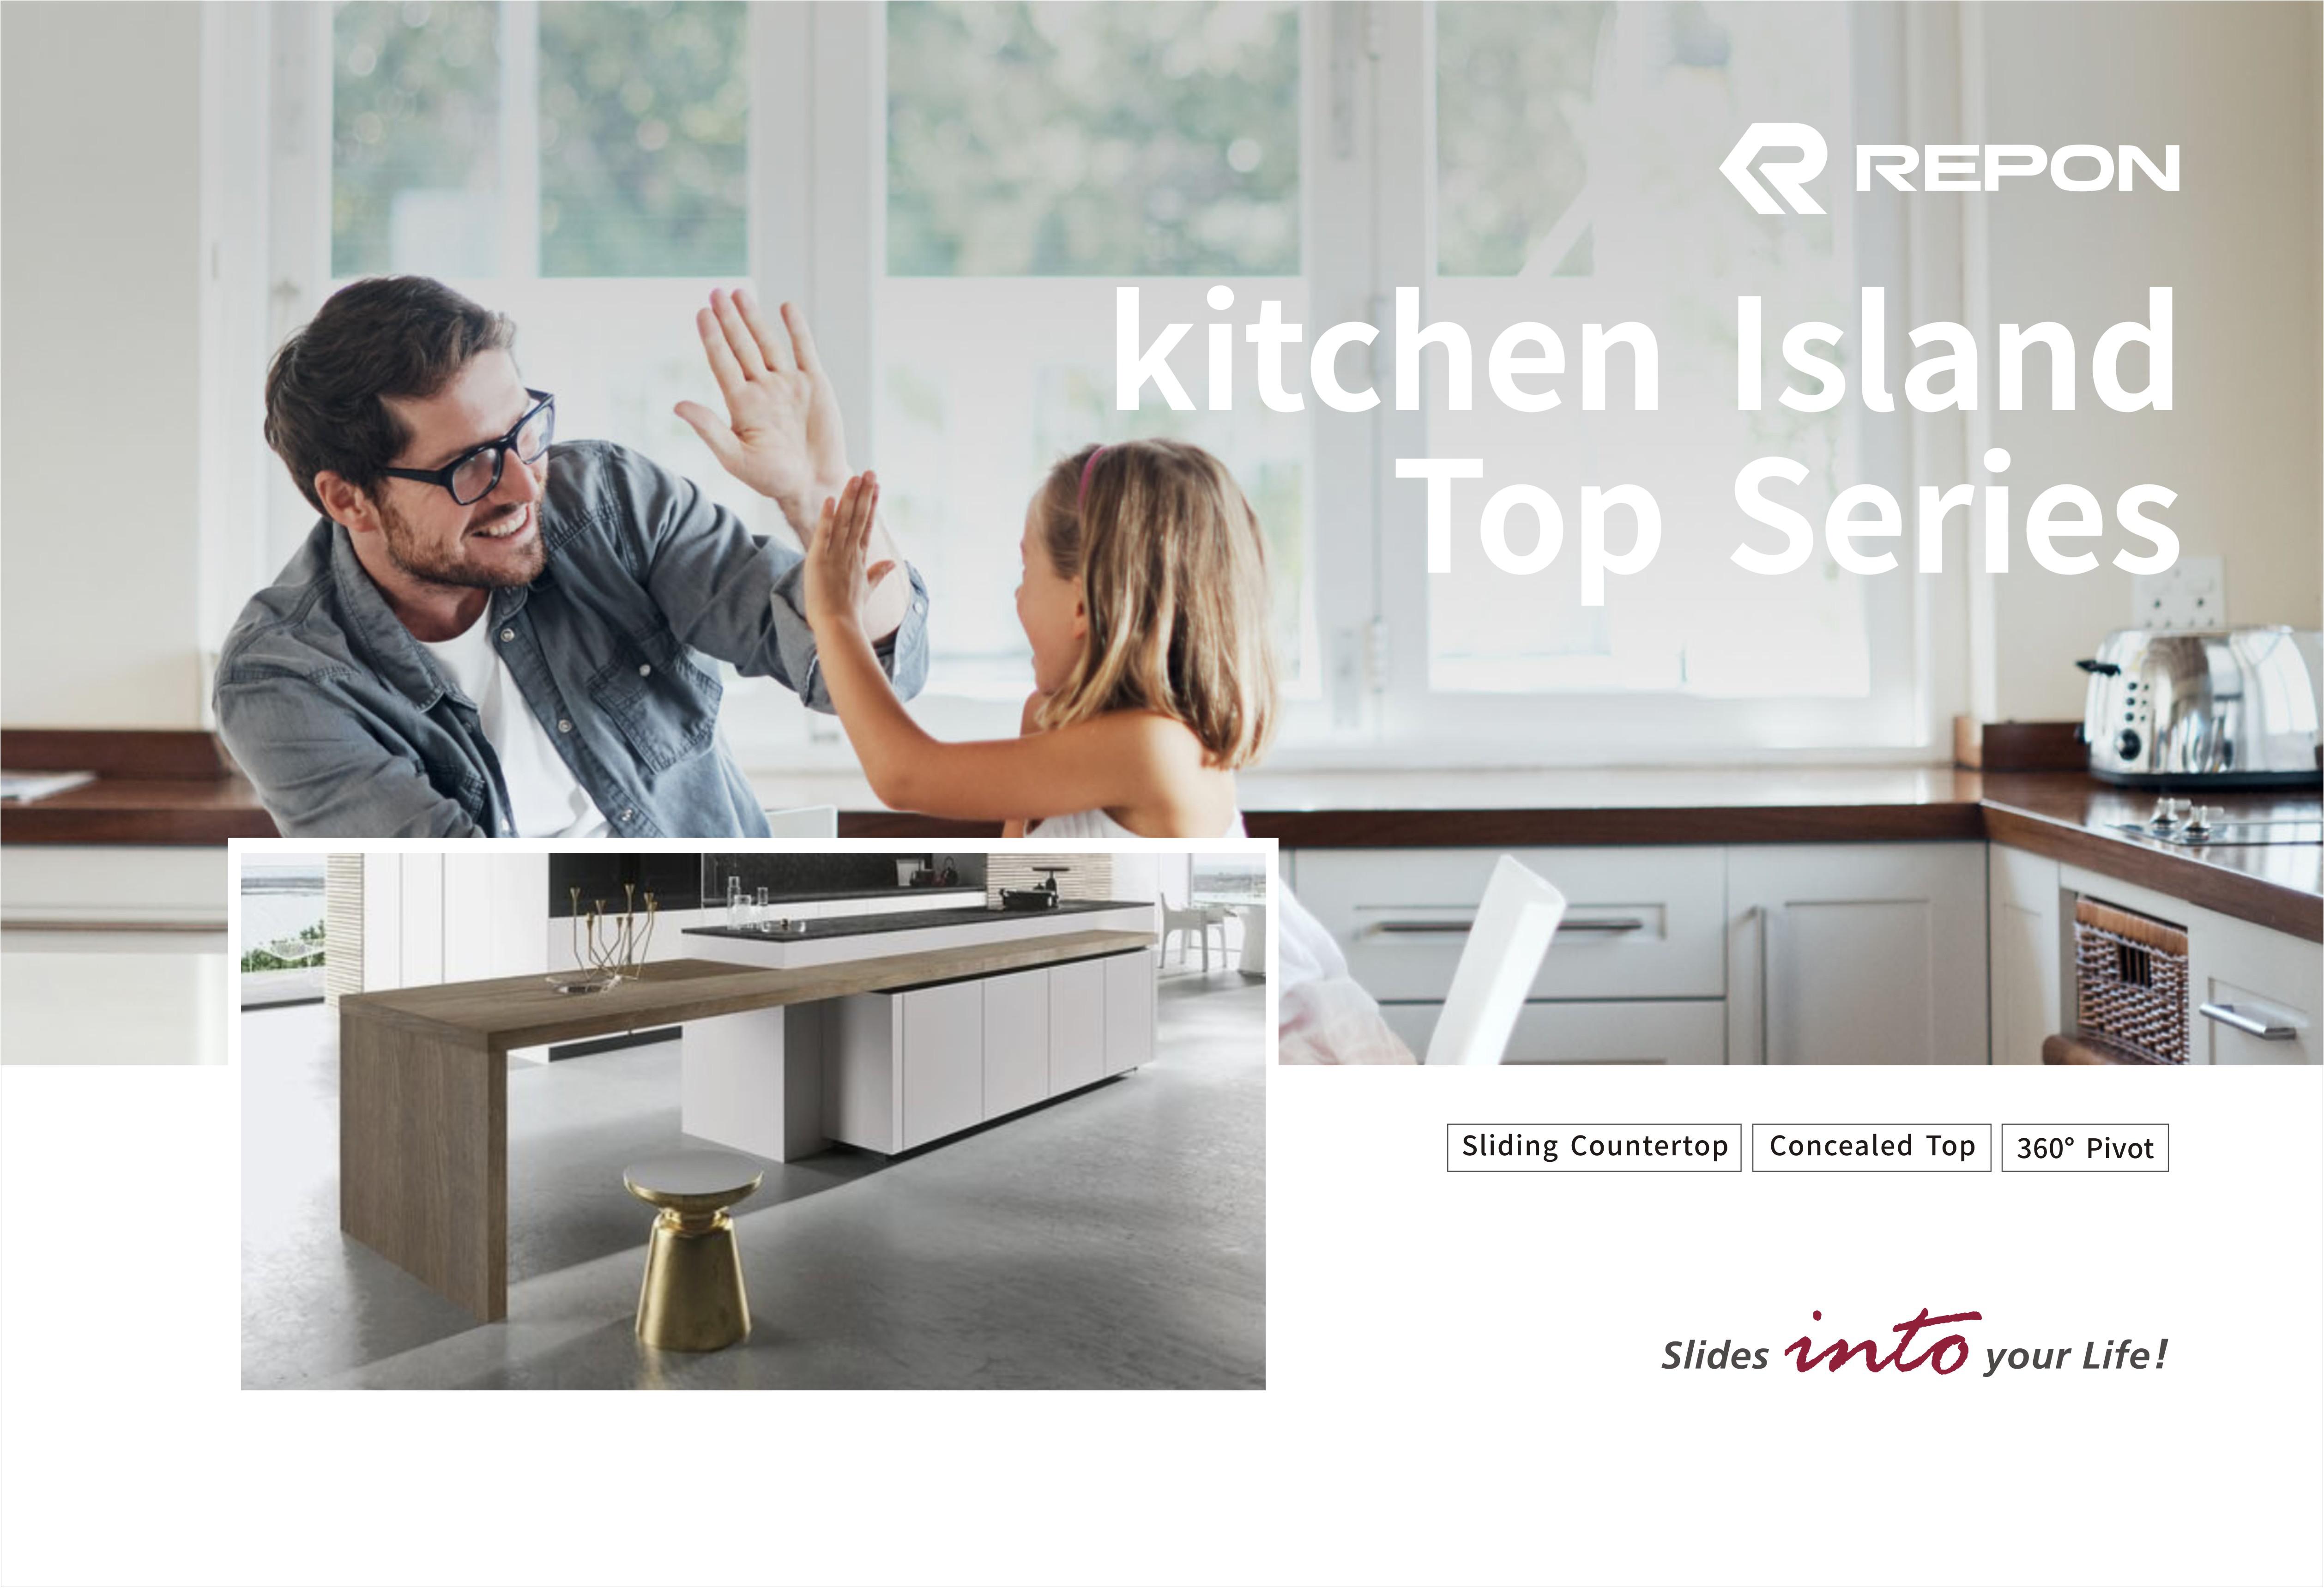 Repon’s Kitchen Island Top series transform your living space.